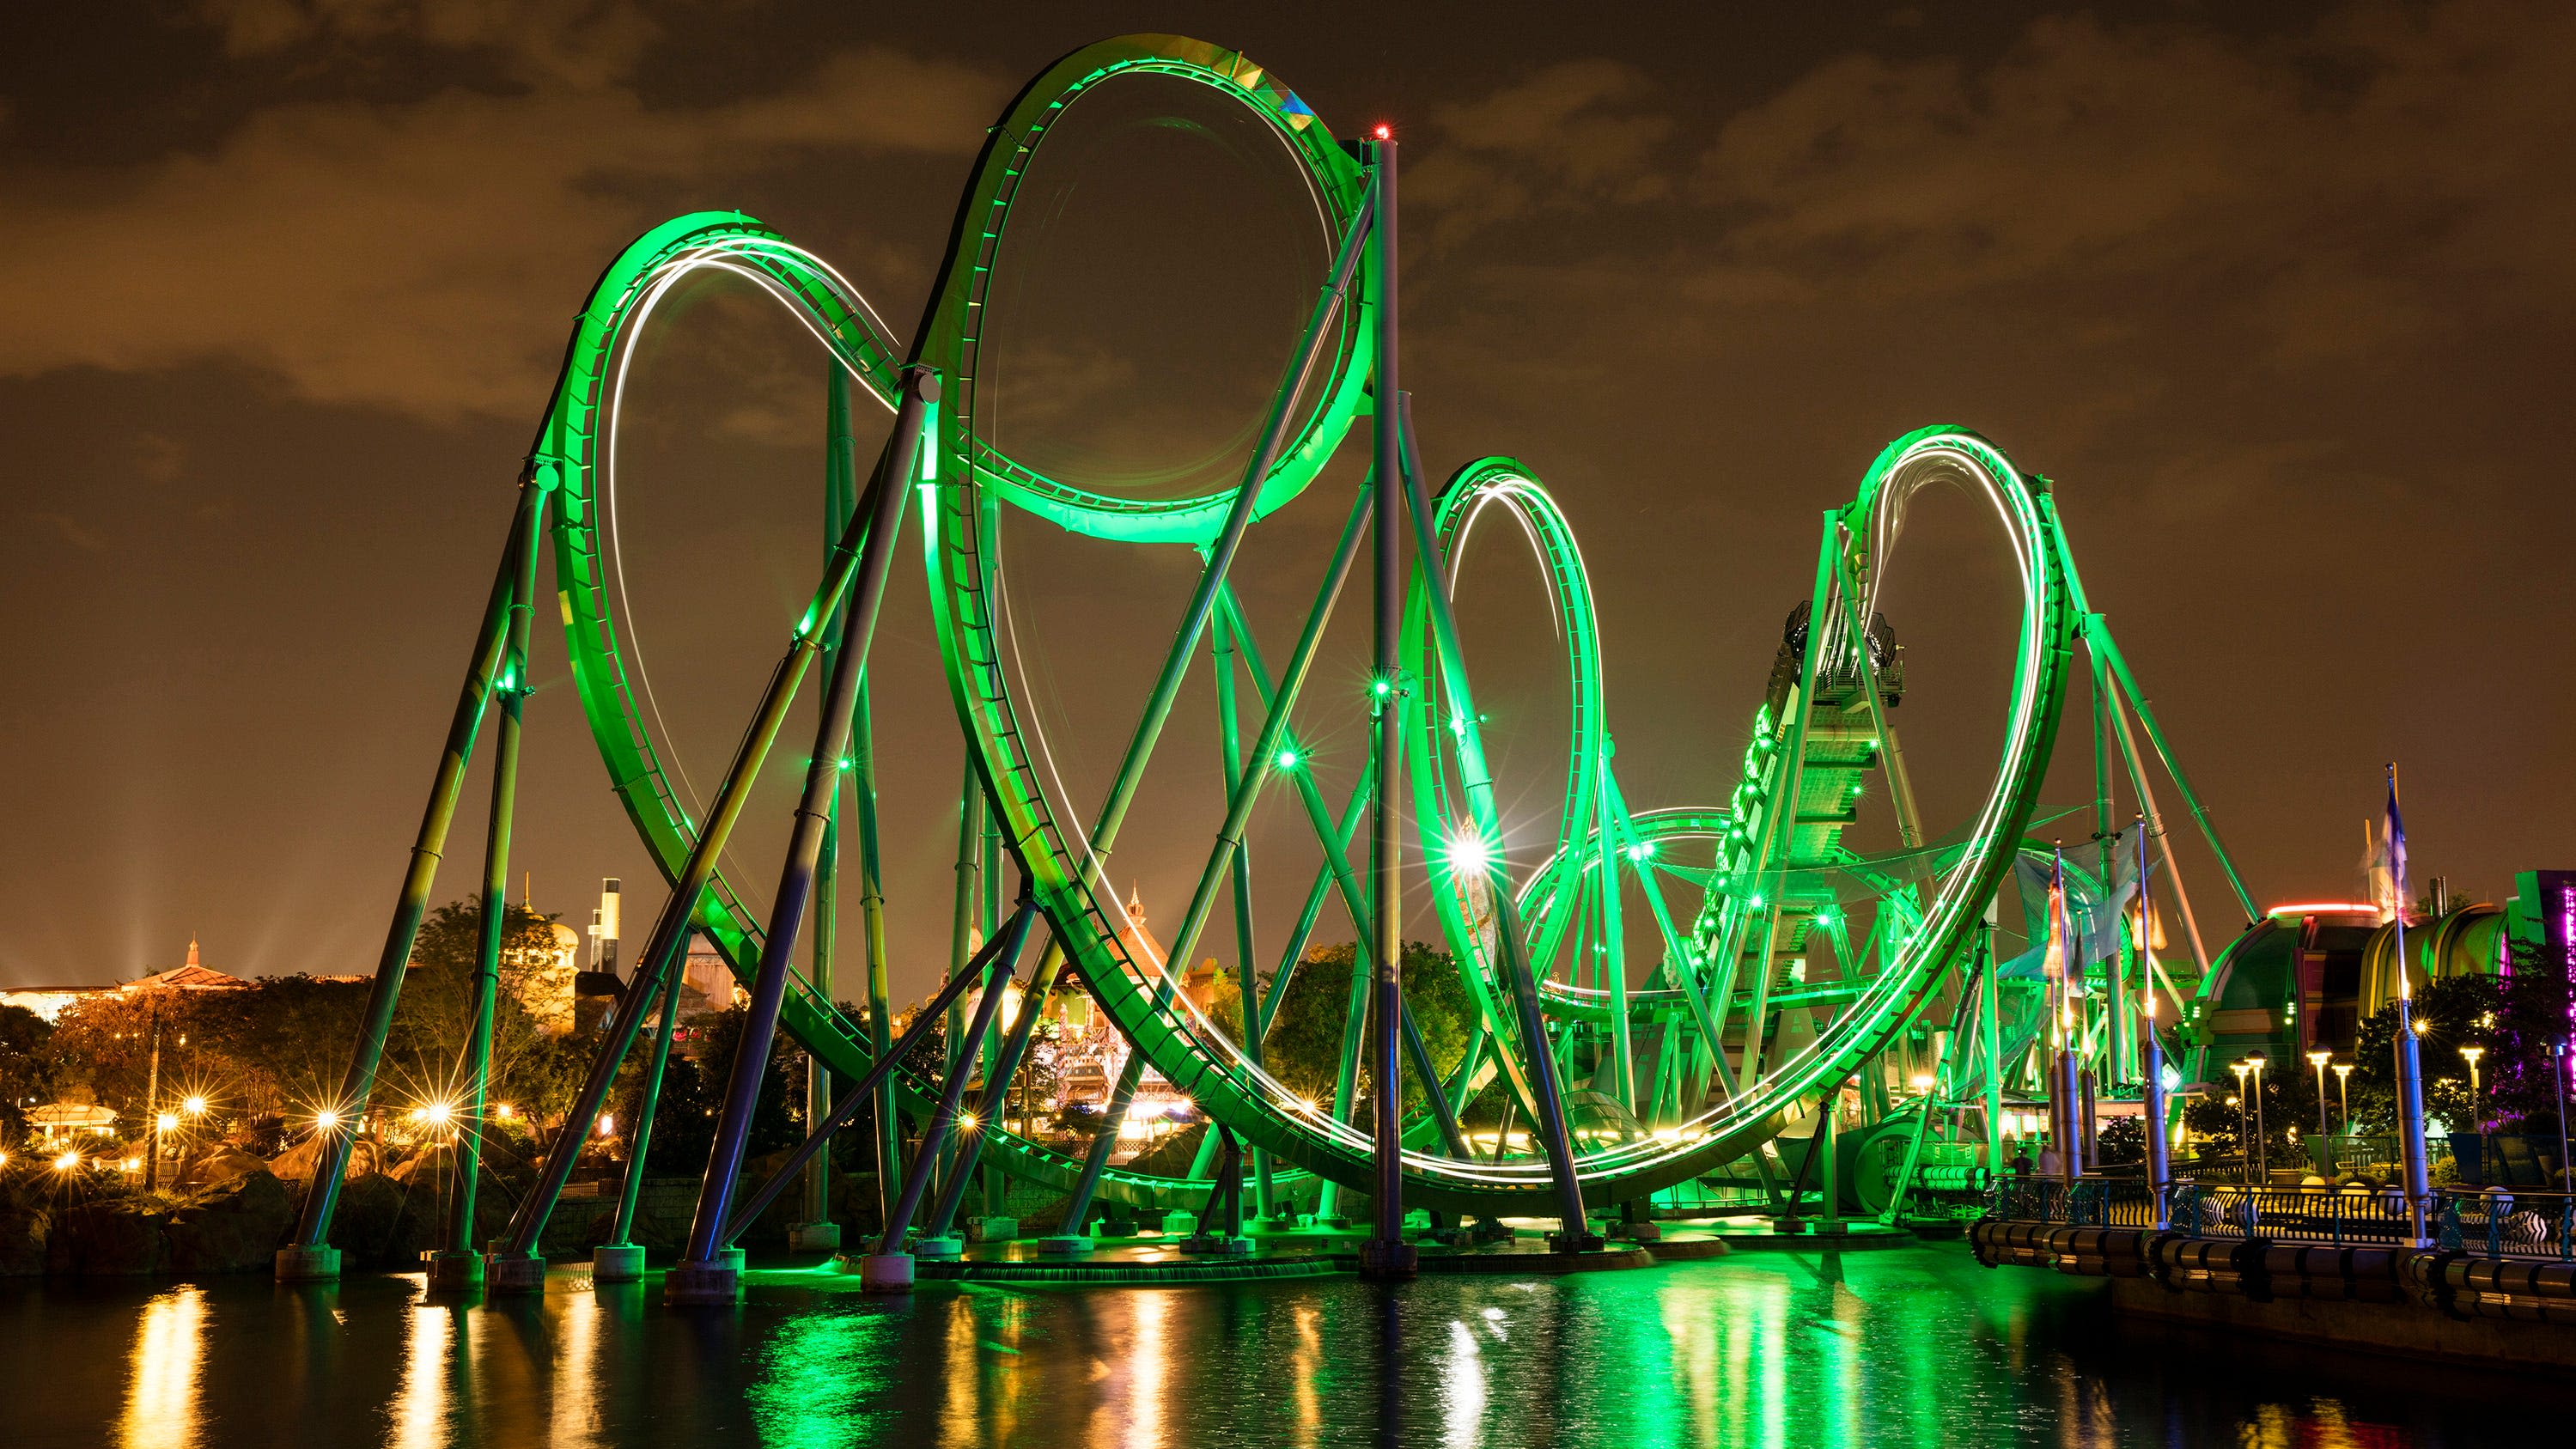 What's the best rollercoaster in Florida? Vote for your favorite among these Final Four!